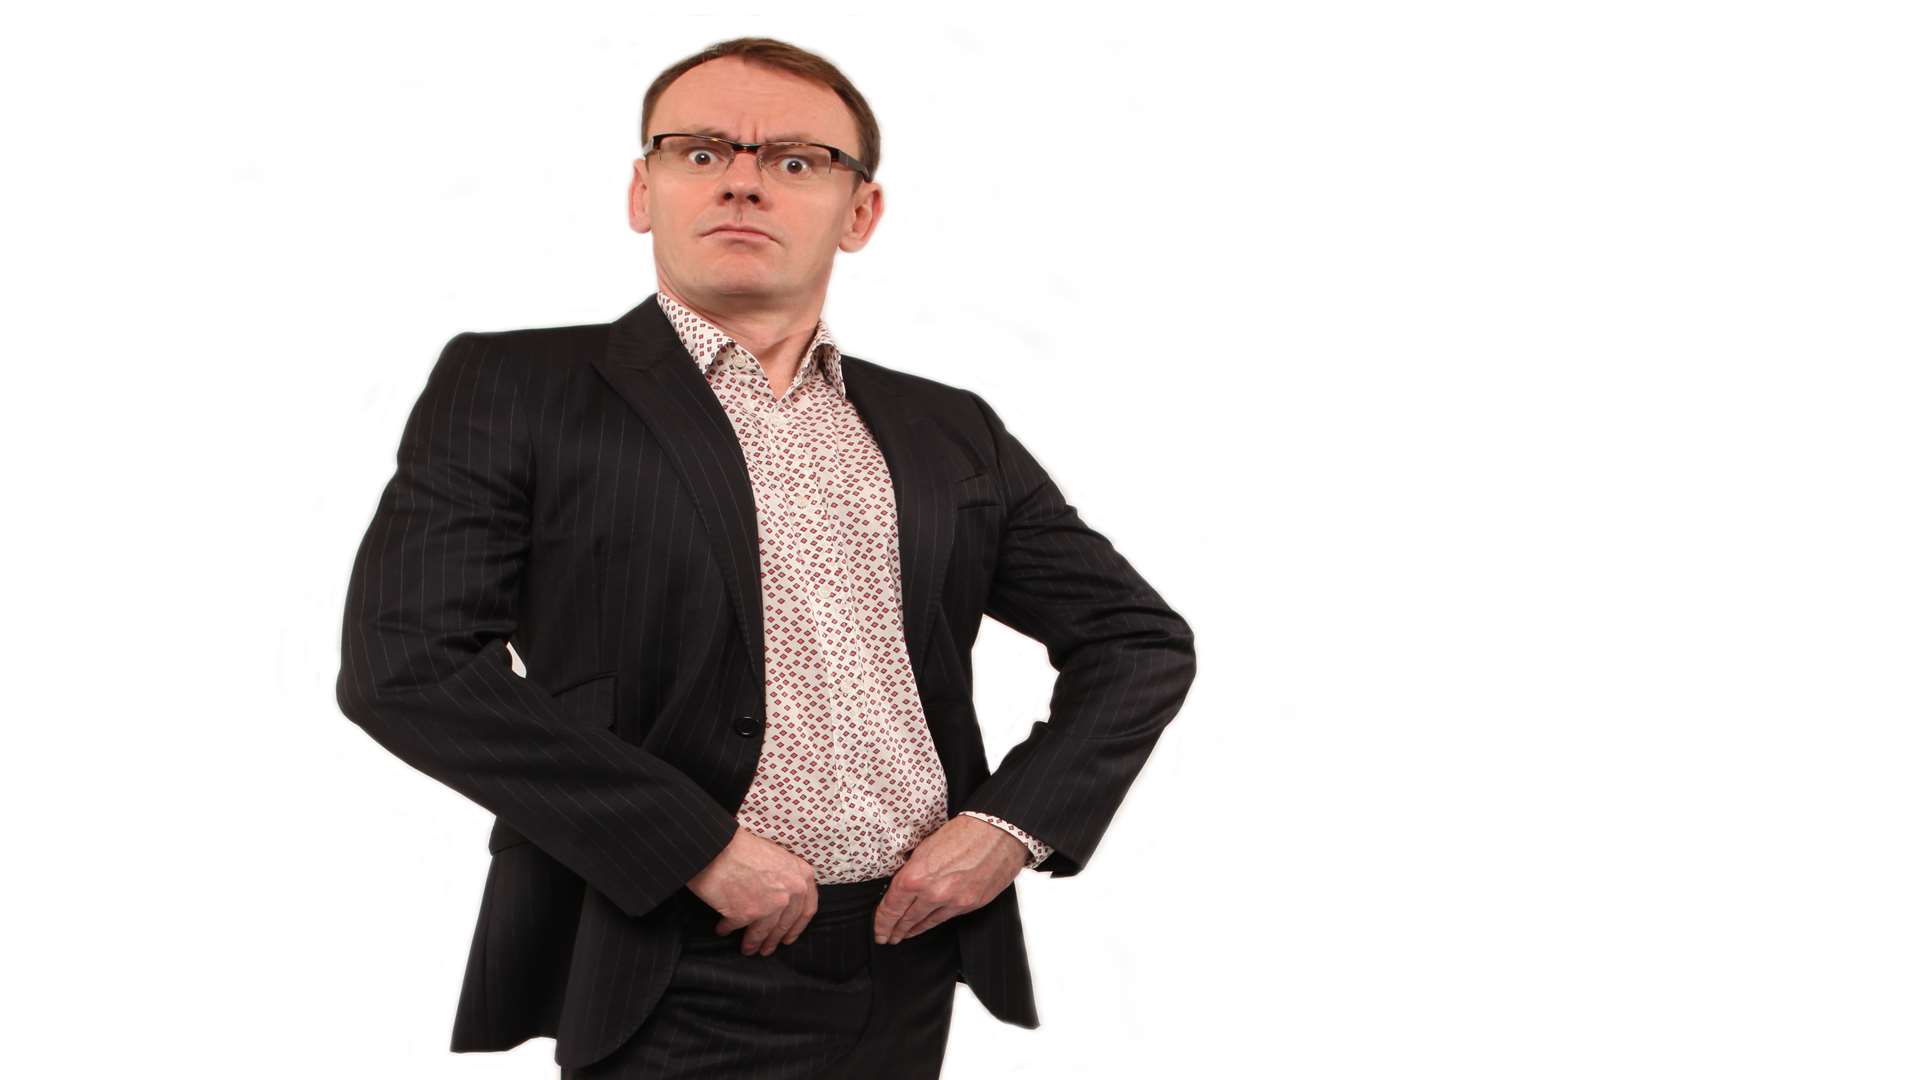 Sean Lock was due at Chatham's Central Theatre